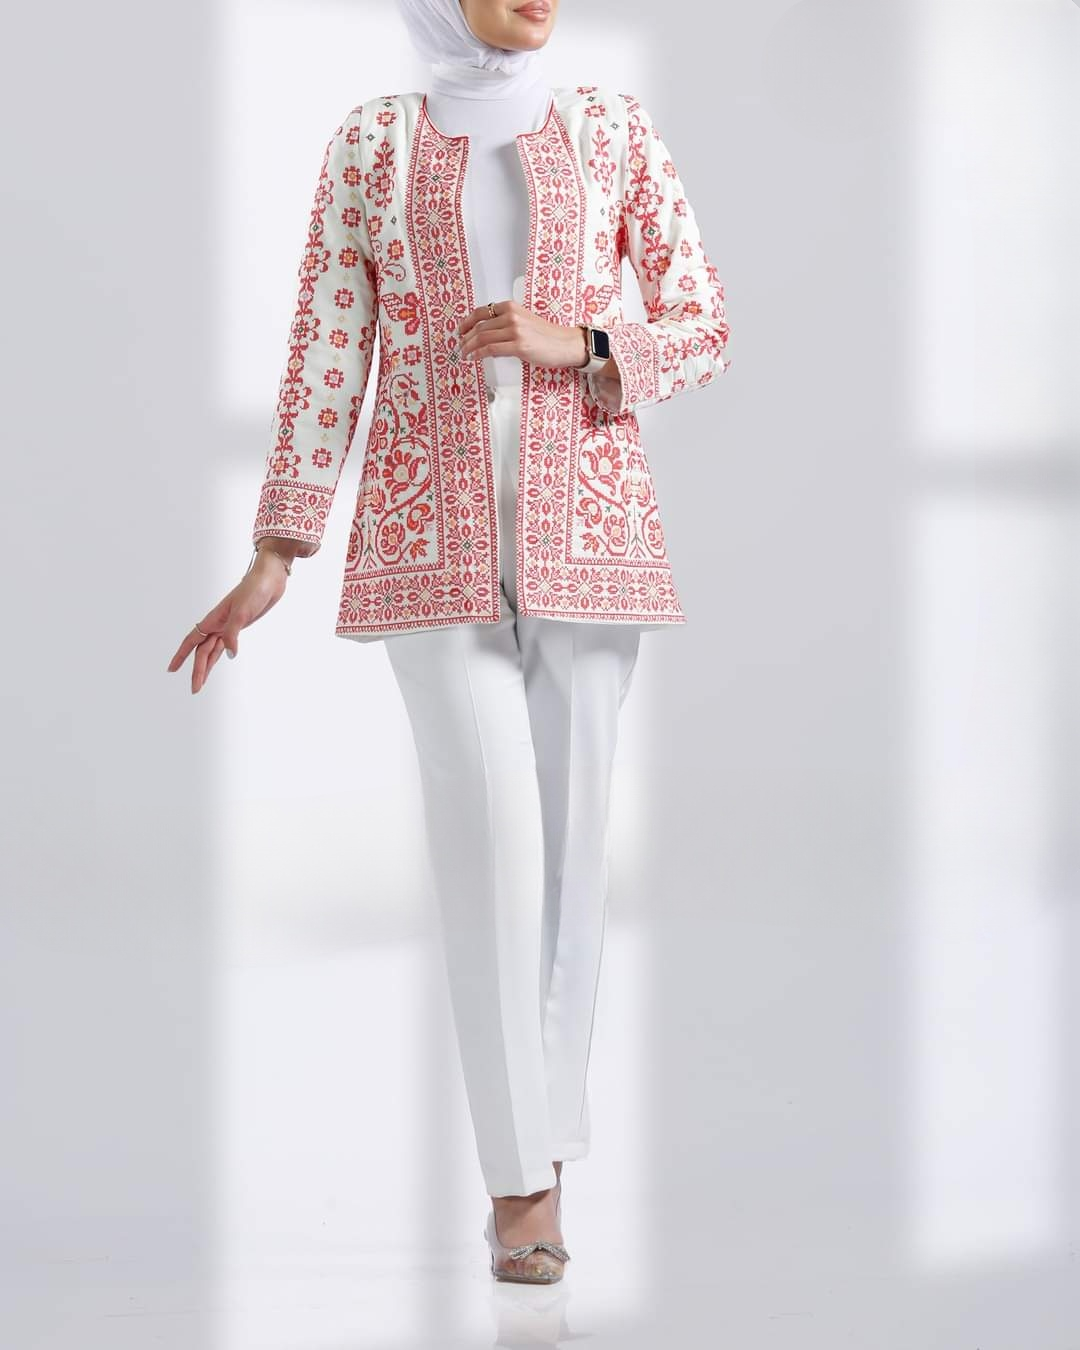 Embroidered Jacket With Collar 2 - Embroidered Palestinian / Jordanian style